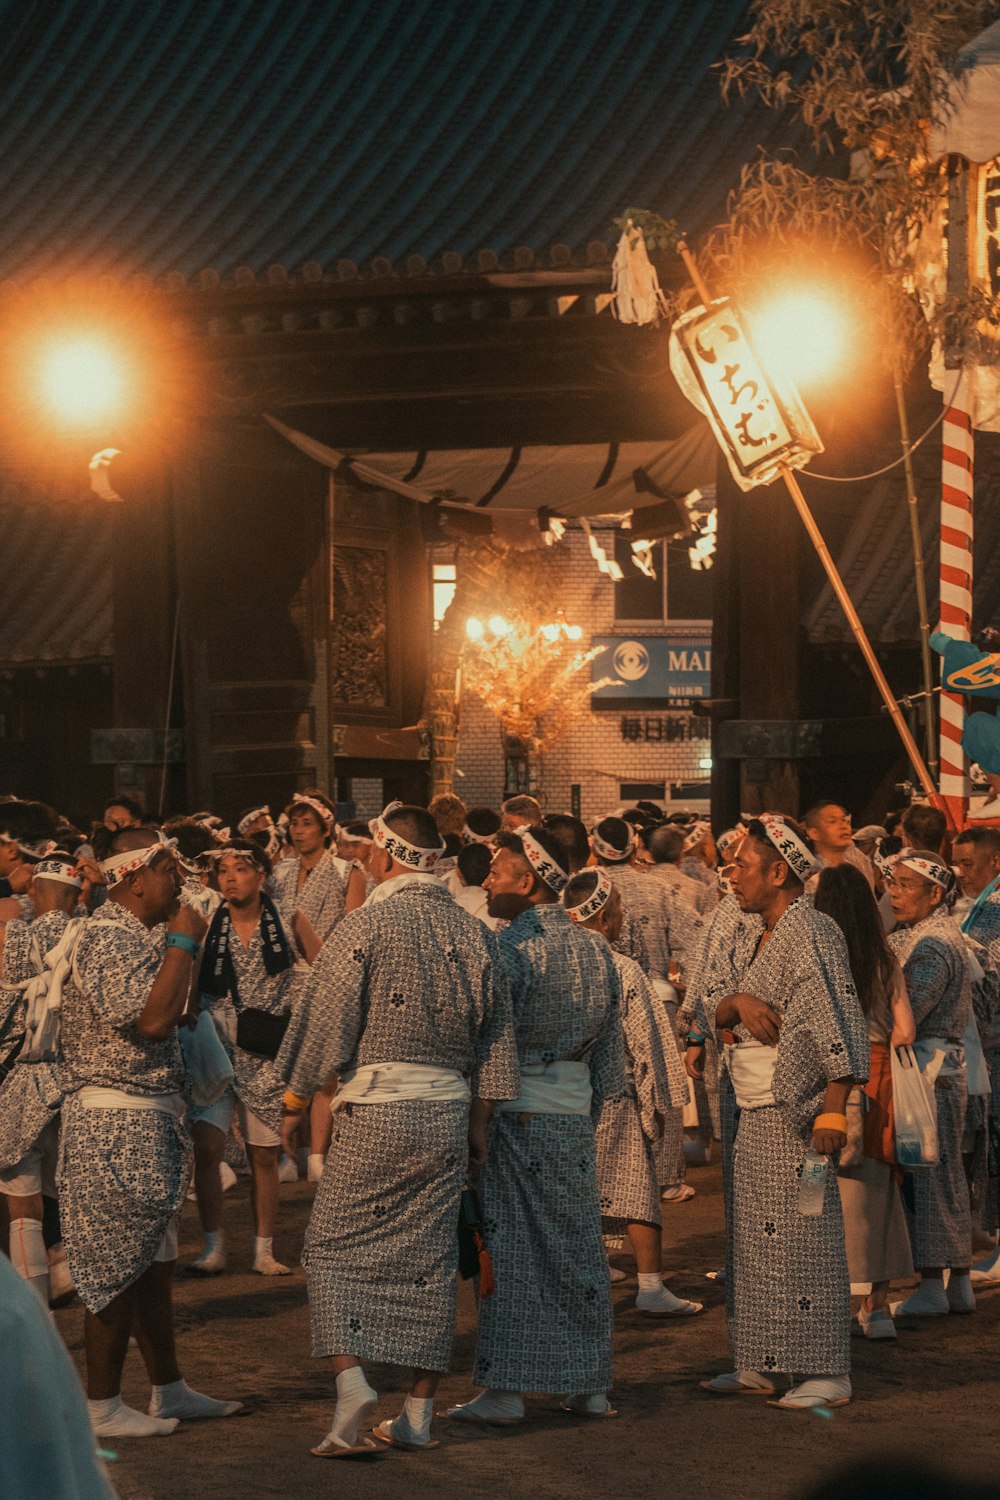 a group of people dressed in traditional japanese clothing